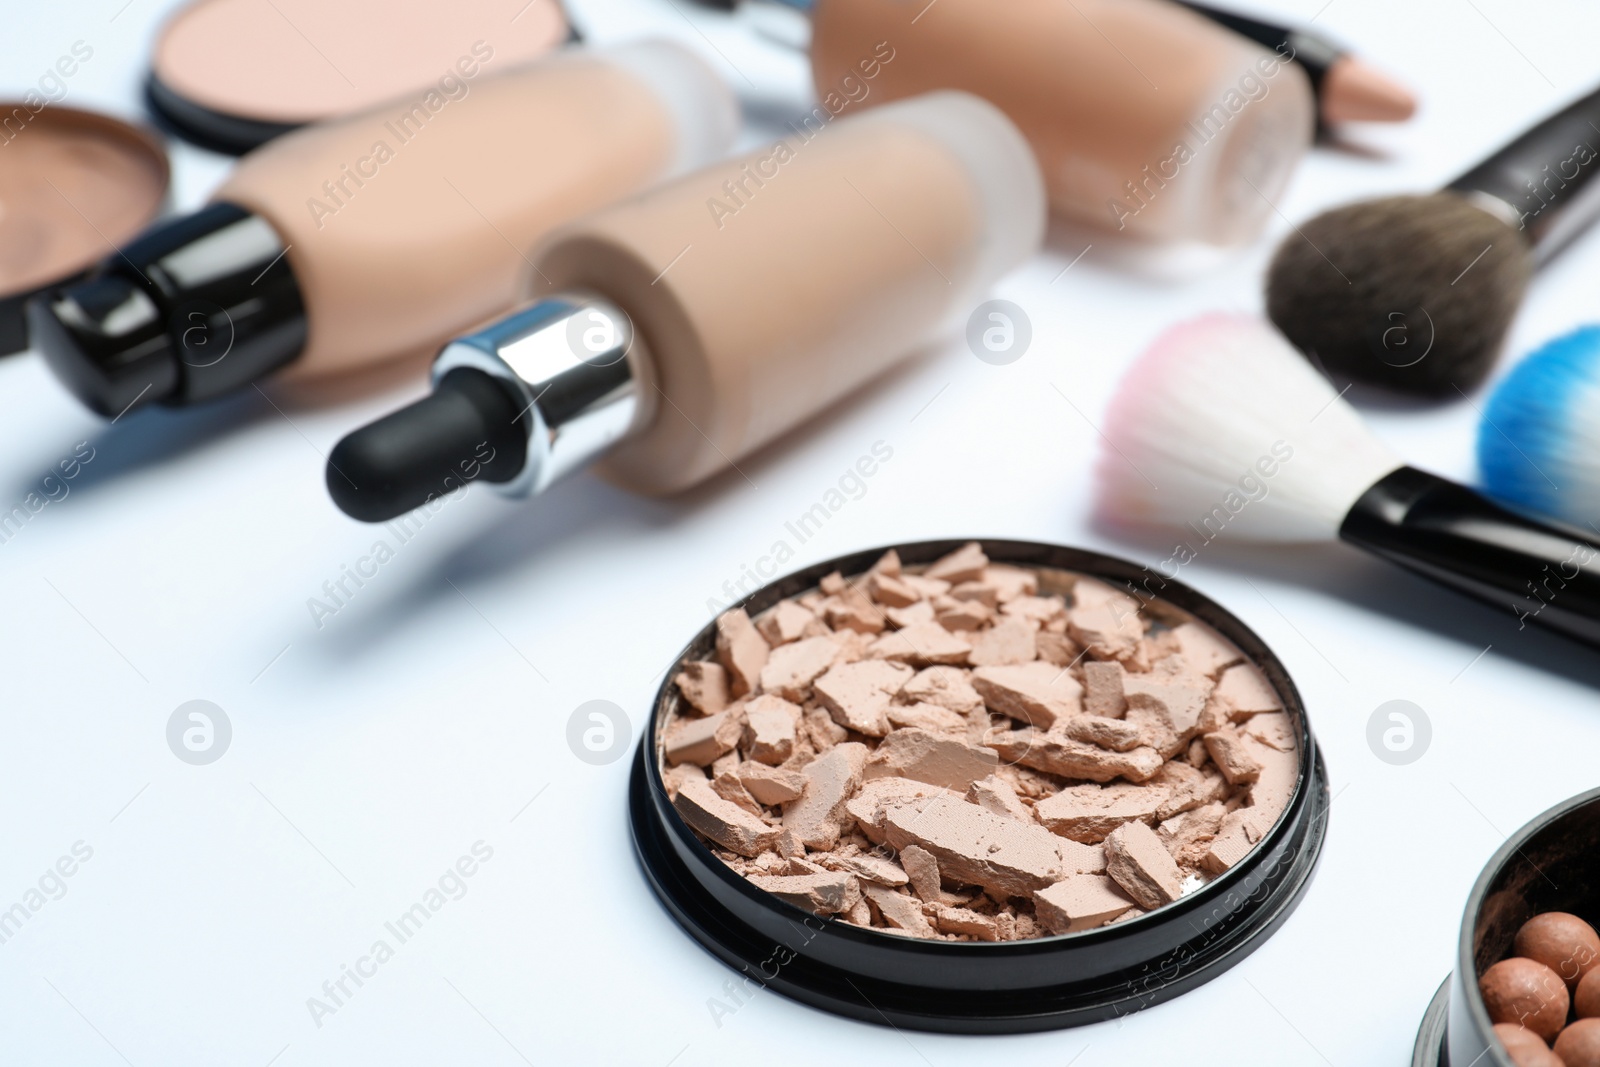 Photo of Composition with skin foundation, powder and beauty accessories on white background